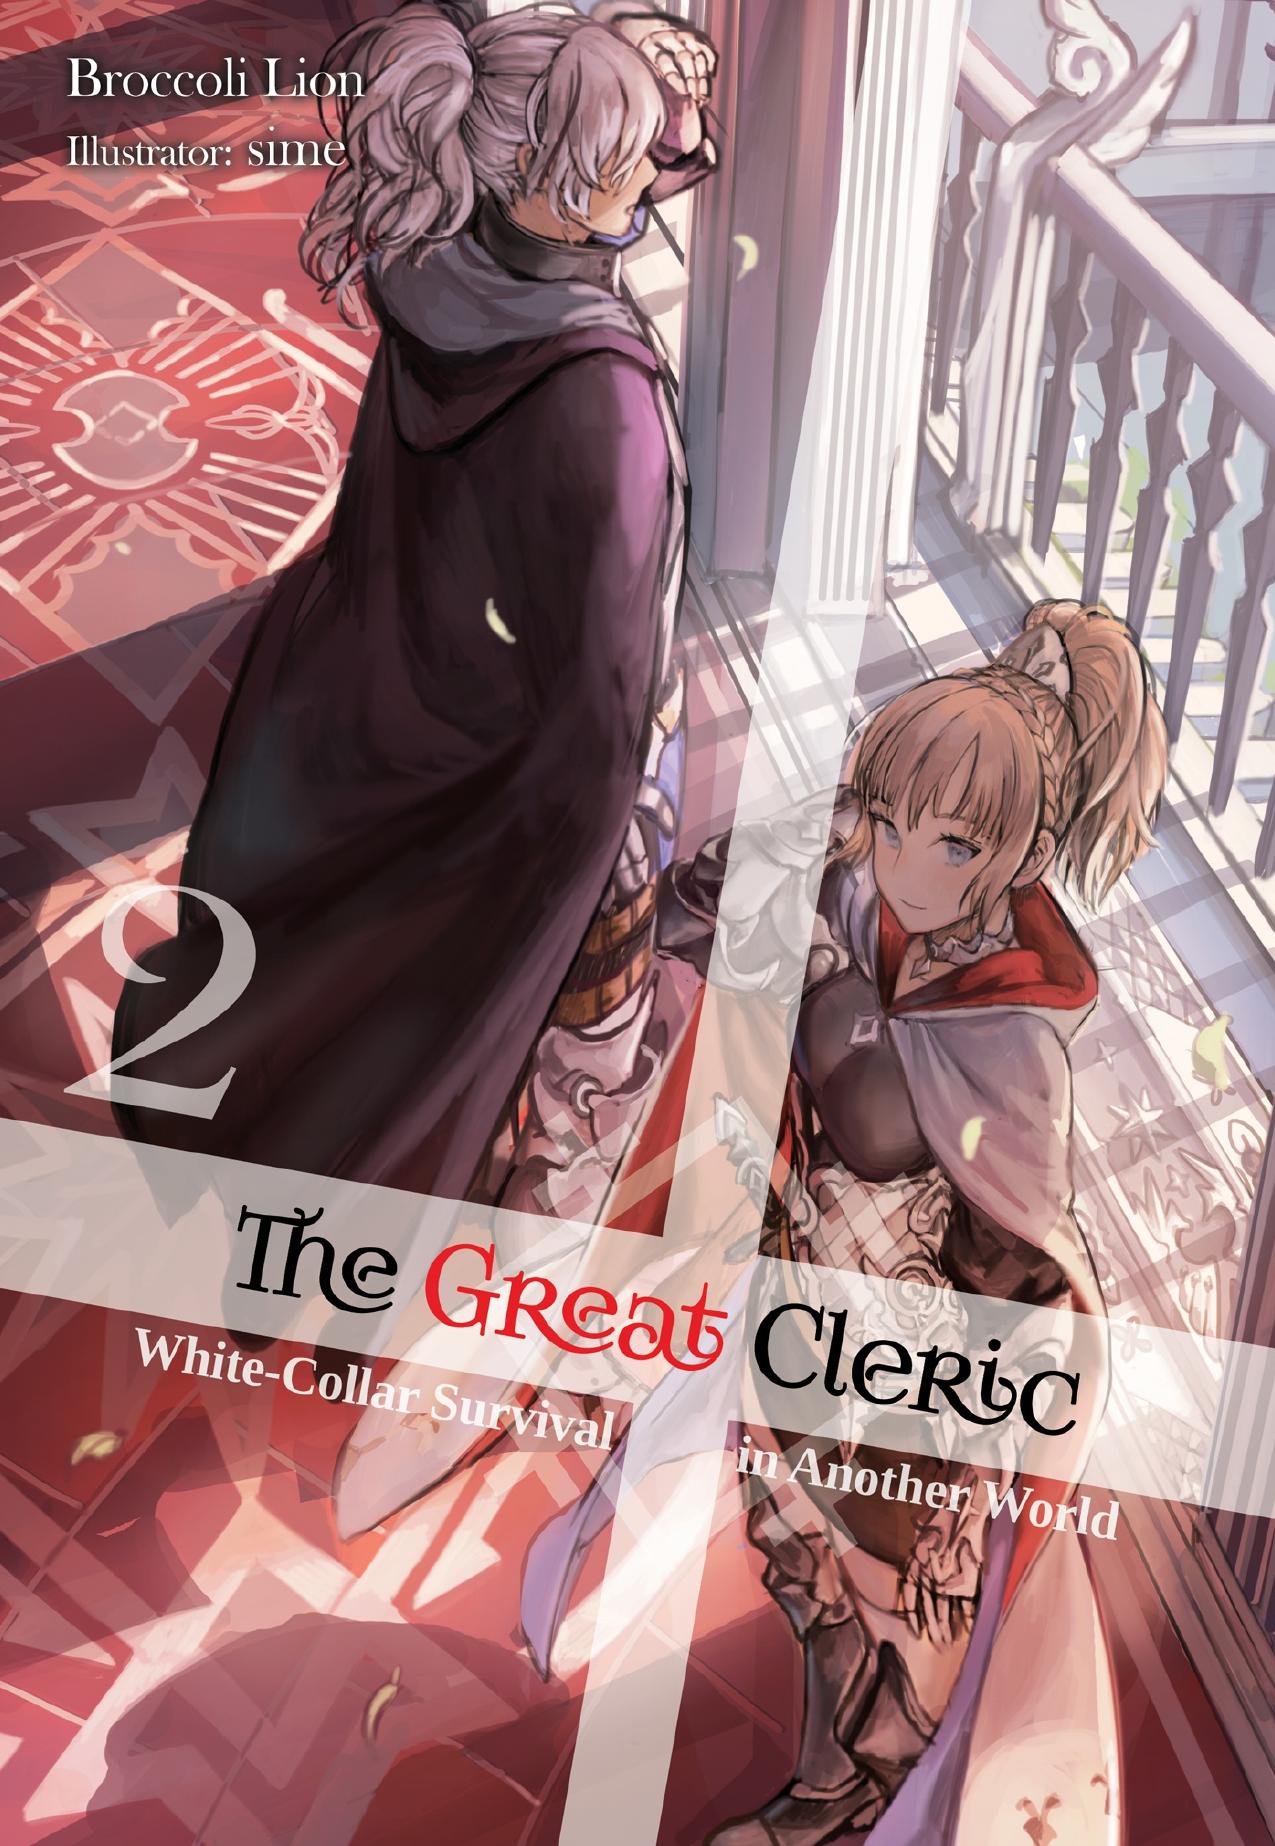 The Great Cleric: Volume 2 by Broccoli Lion